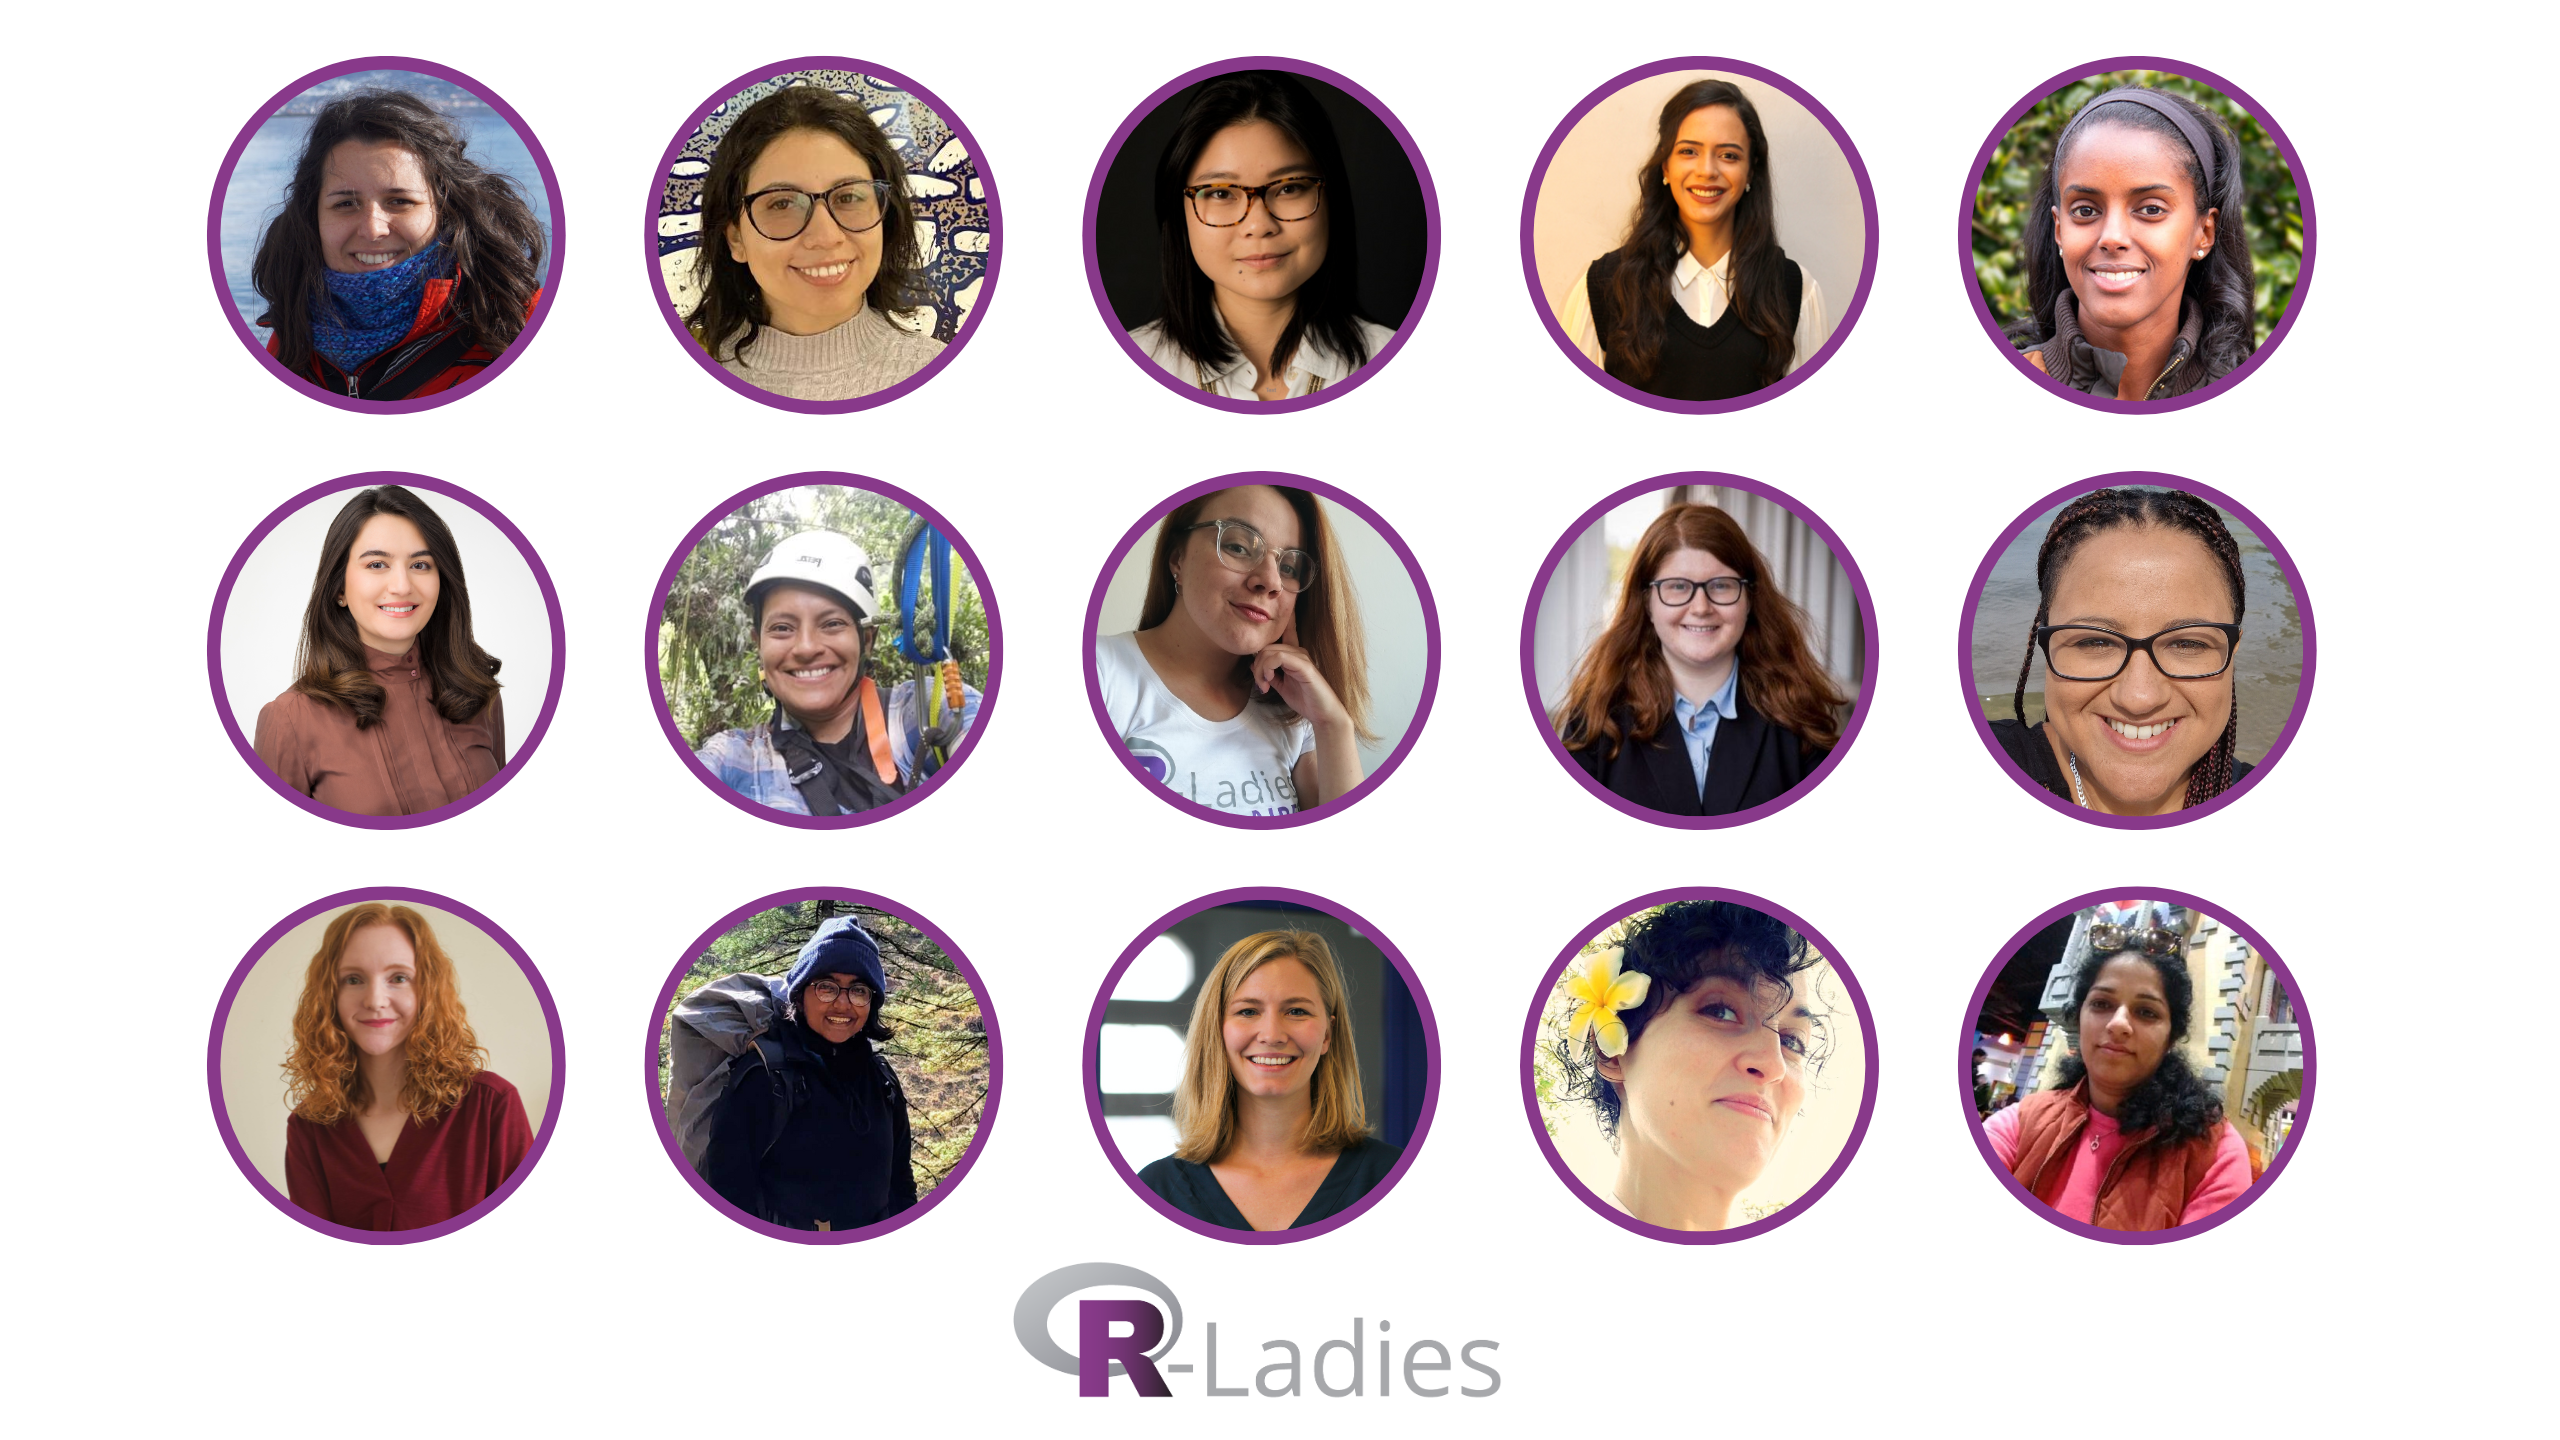 Thumbnail photos of 15 new global team members cropped in circle images outlined in purple.